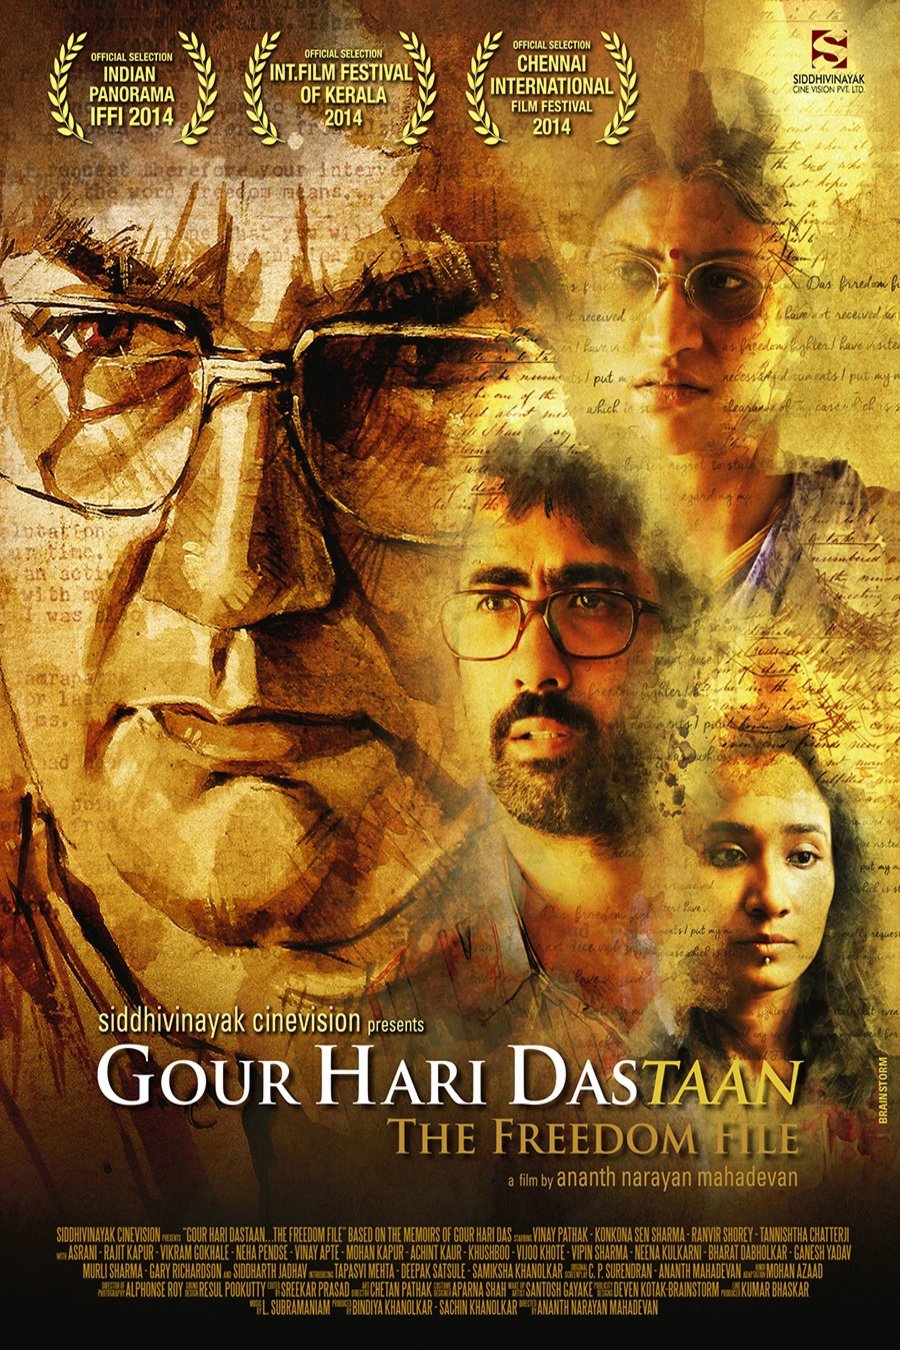 Hindi poster of the movie Gour Hari Dastaan: The Freedom File